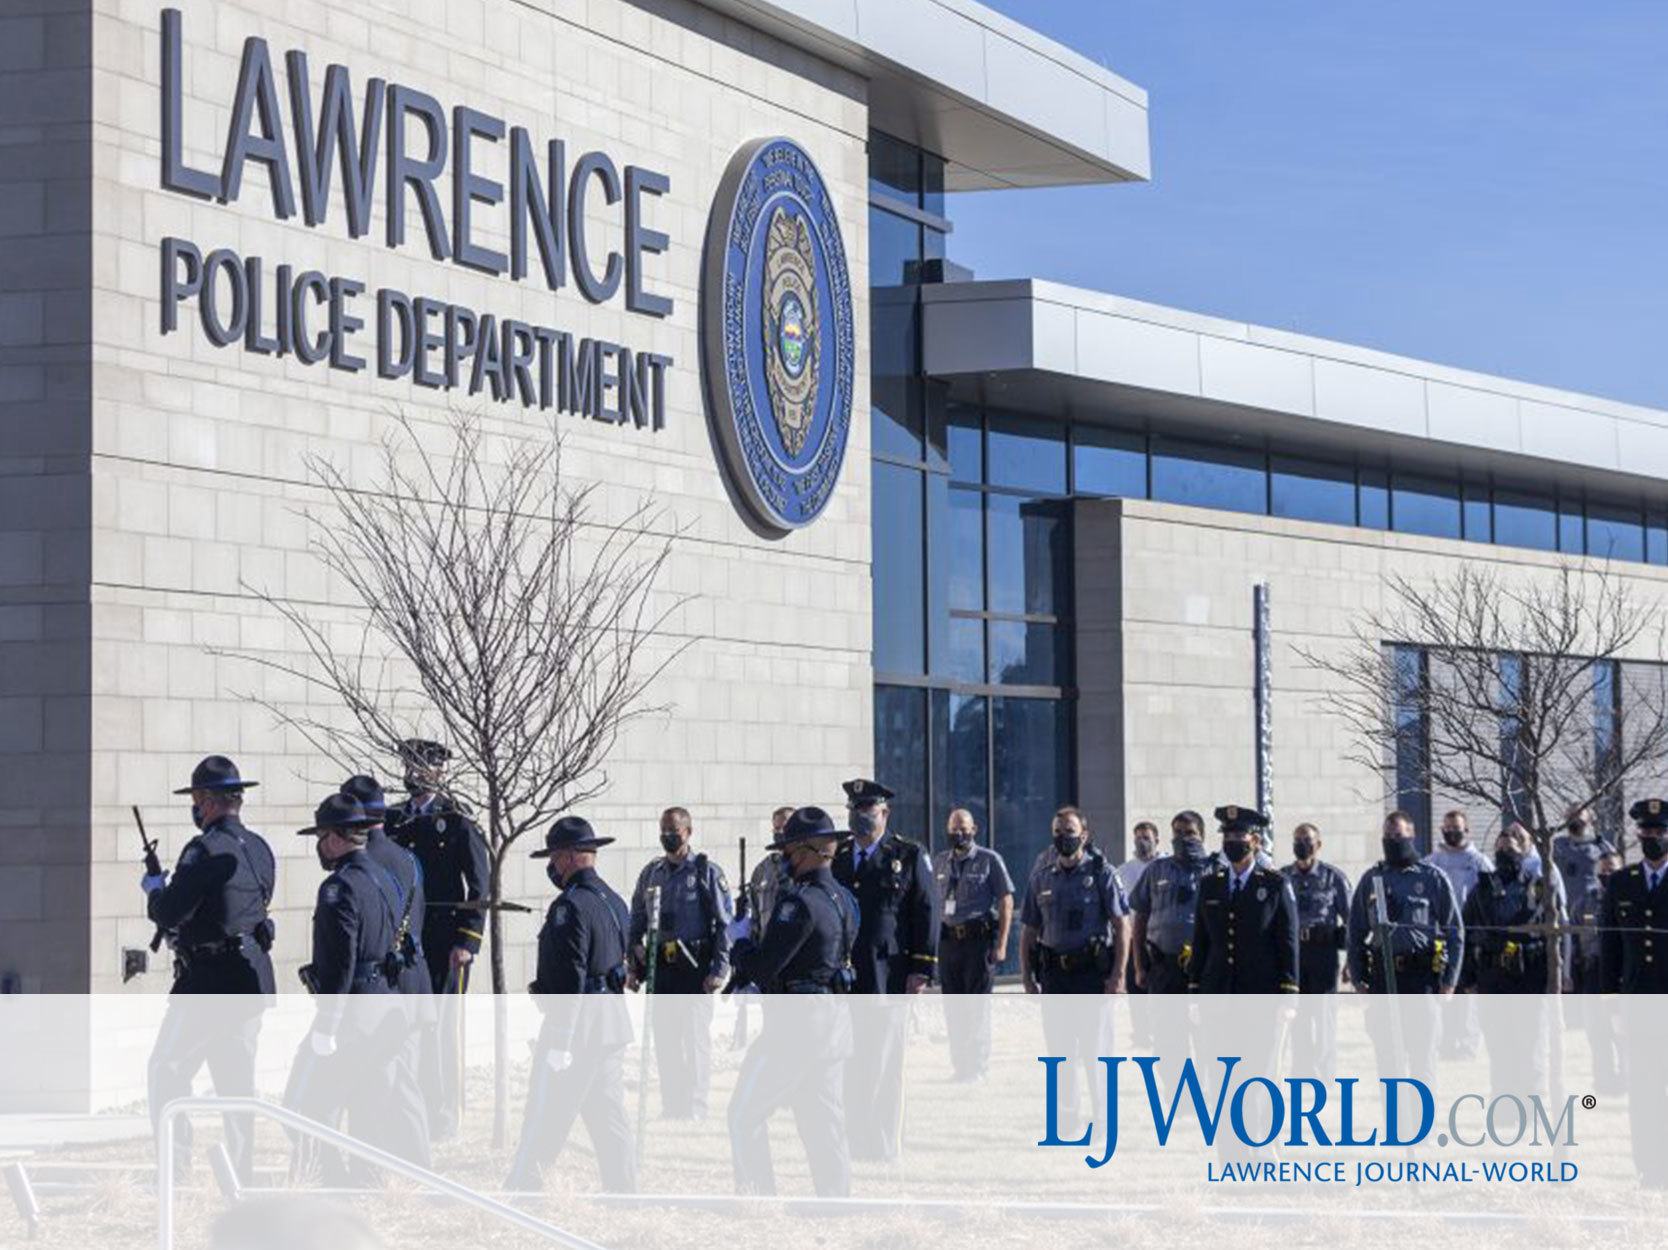 Lawrence police department marks ‘historic occasion’ with opening of its nearly $20M headquarters